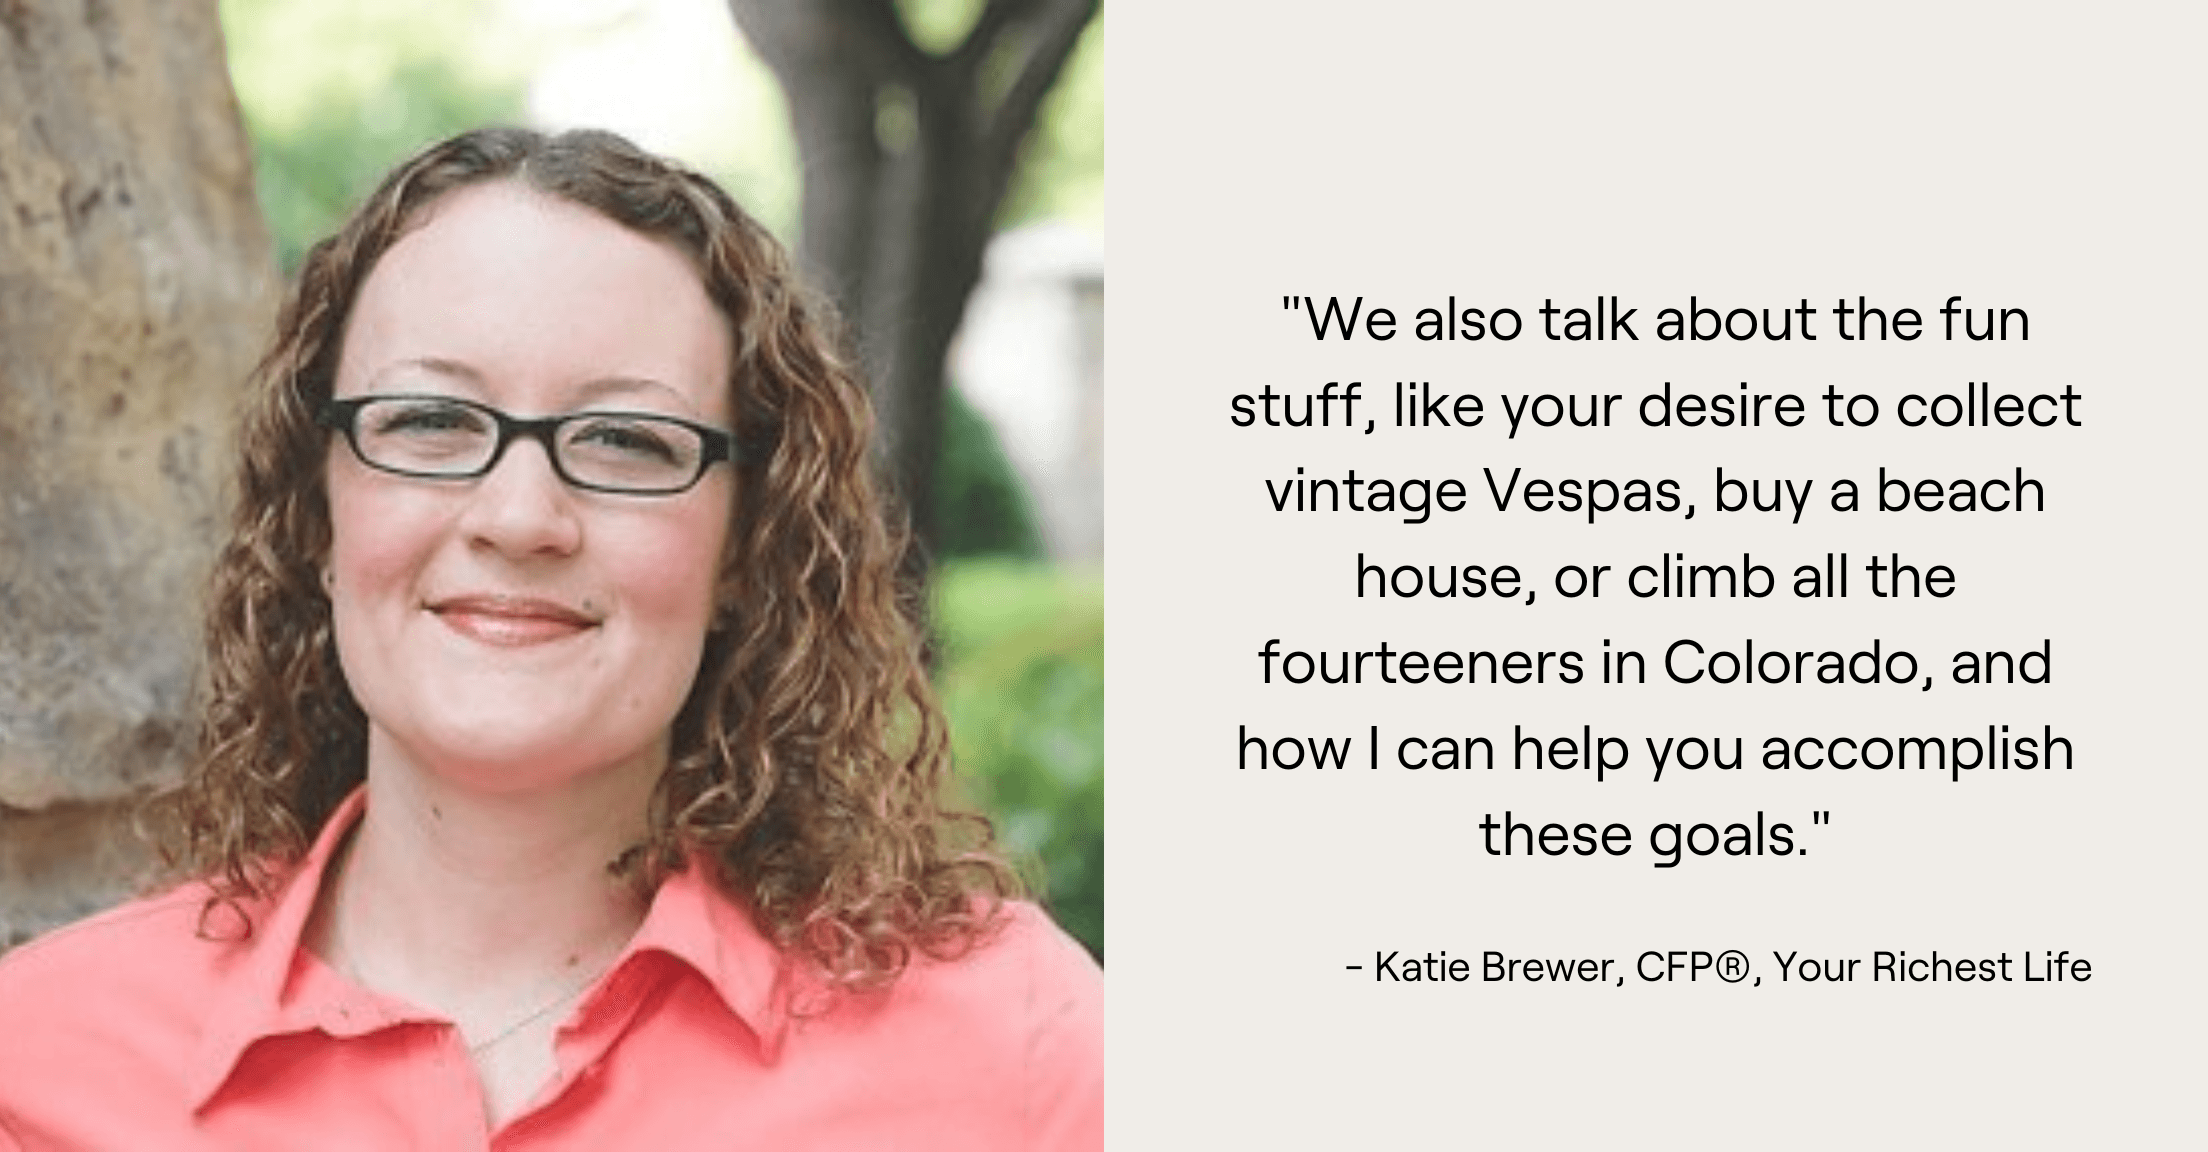 Headshot of advisor Katie Brewer and quote, "We also talk about the fun stuff, like your desire to collect vintage Vespas, buy a beach house, or climb all the fourteeners in Colorado, and how I can help you accomplish these goals."